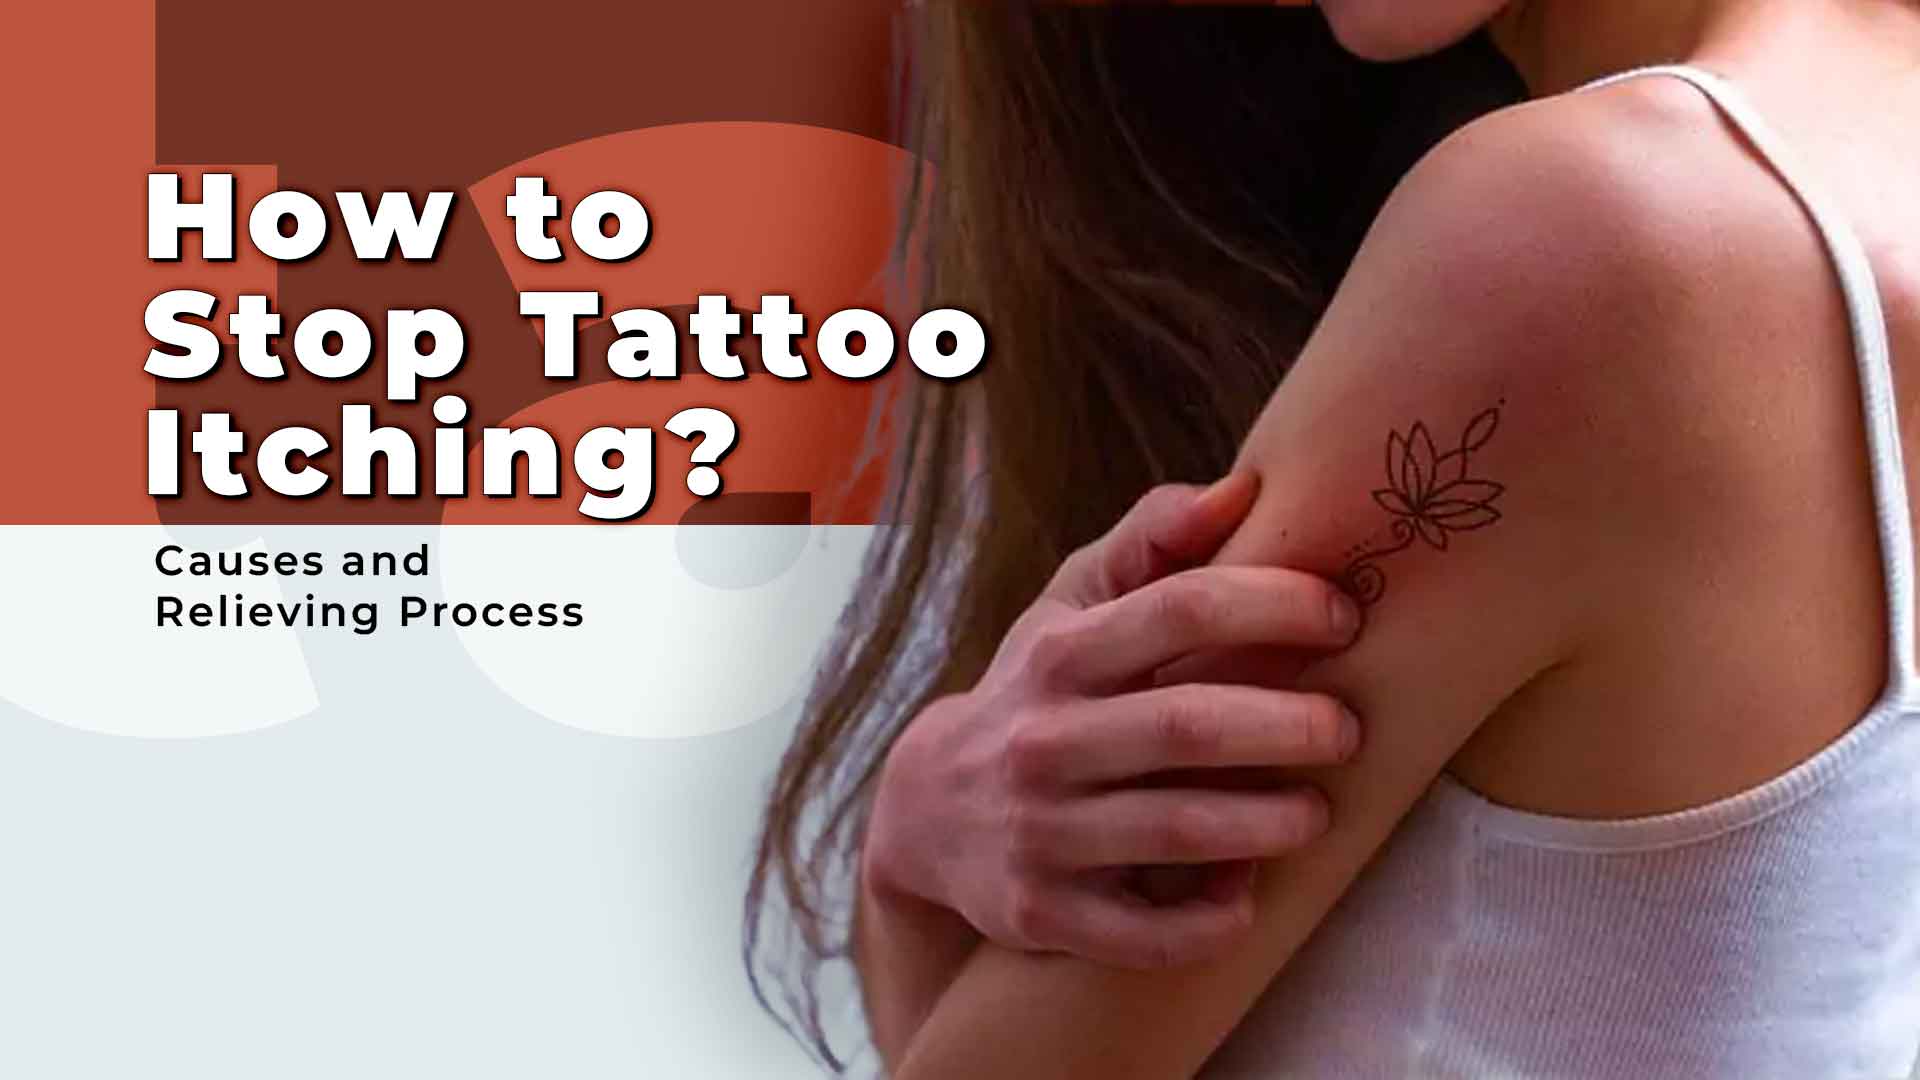 How to Stop Tattoo Itching? Causes and Relieving Process